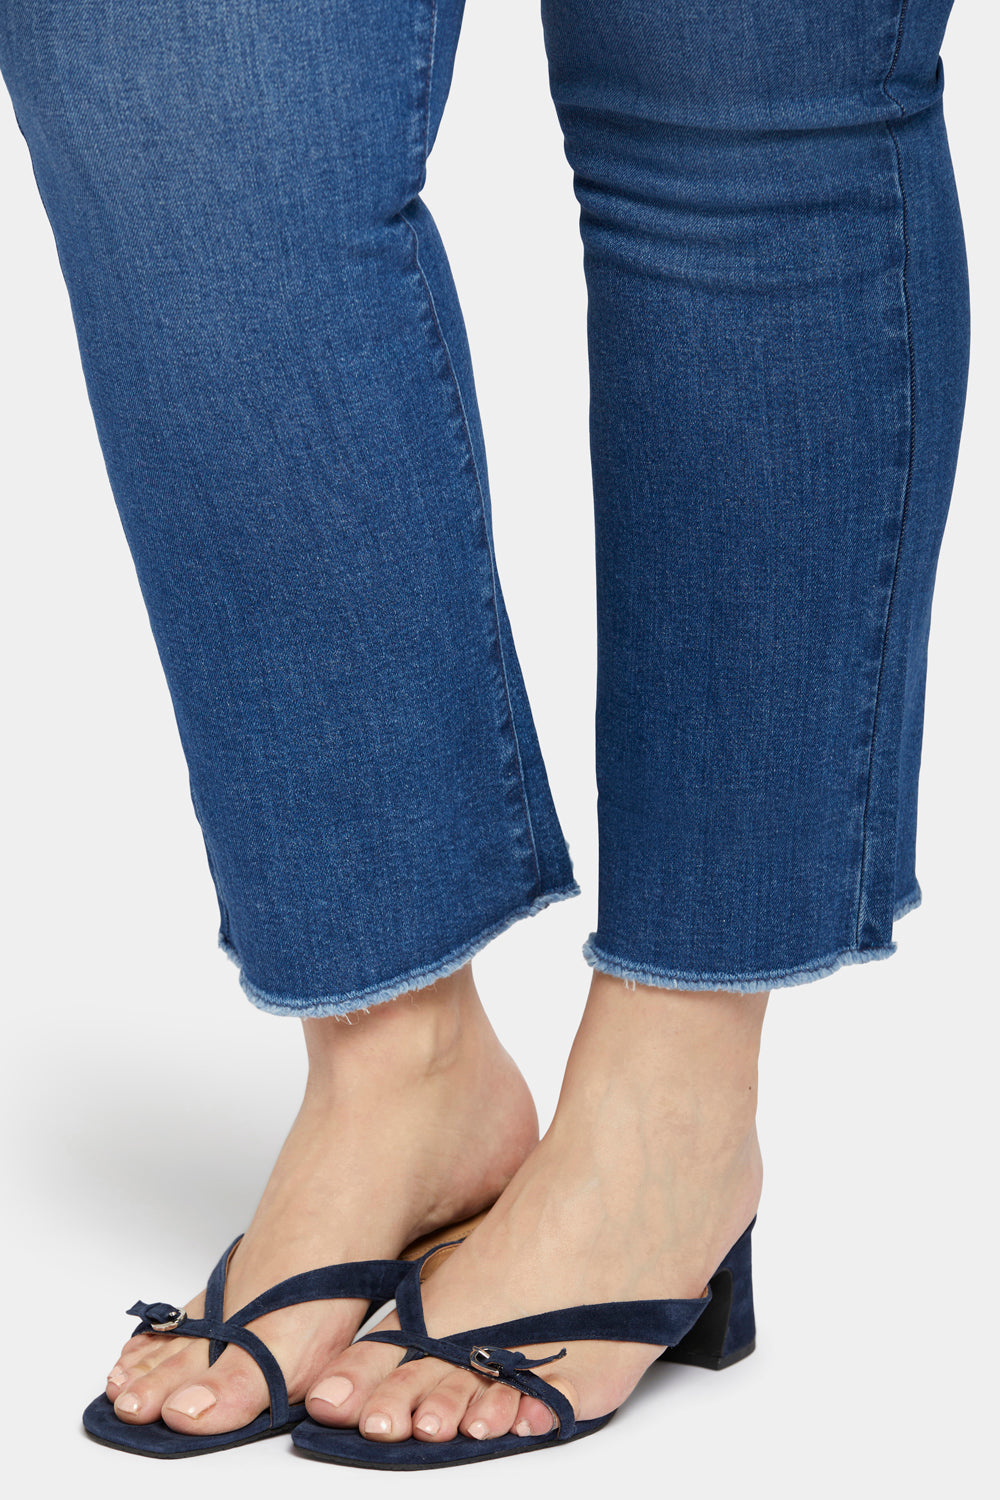 NYDJ Slim Bootcut Ankle Jeans In Plus Size With High Rise And Frayed Hems - Desire